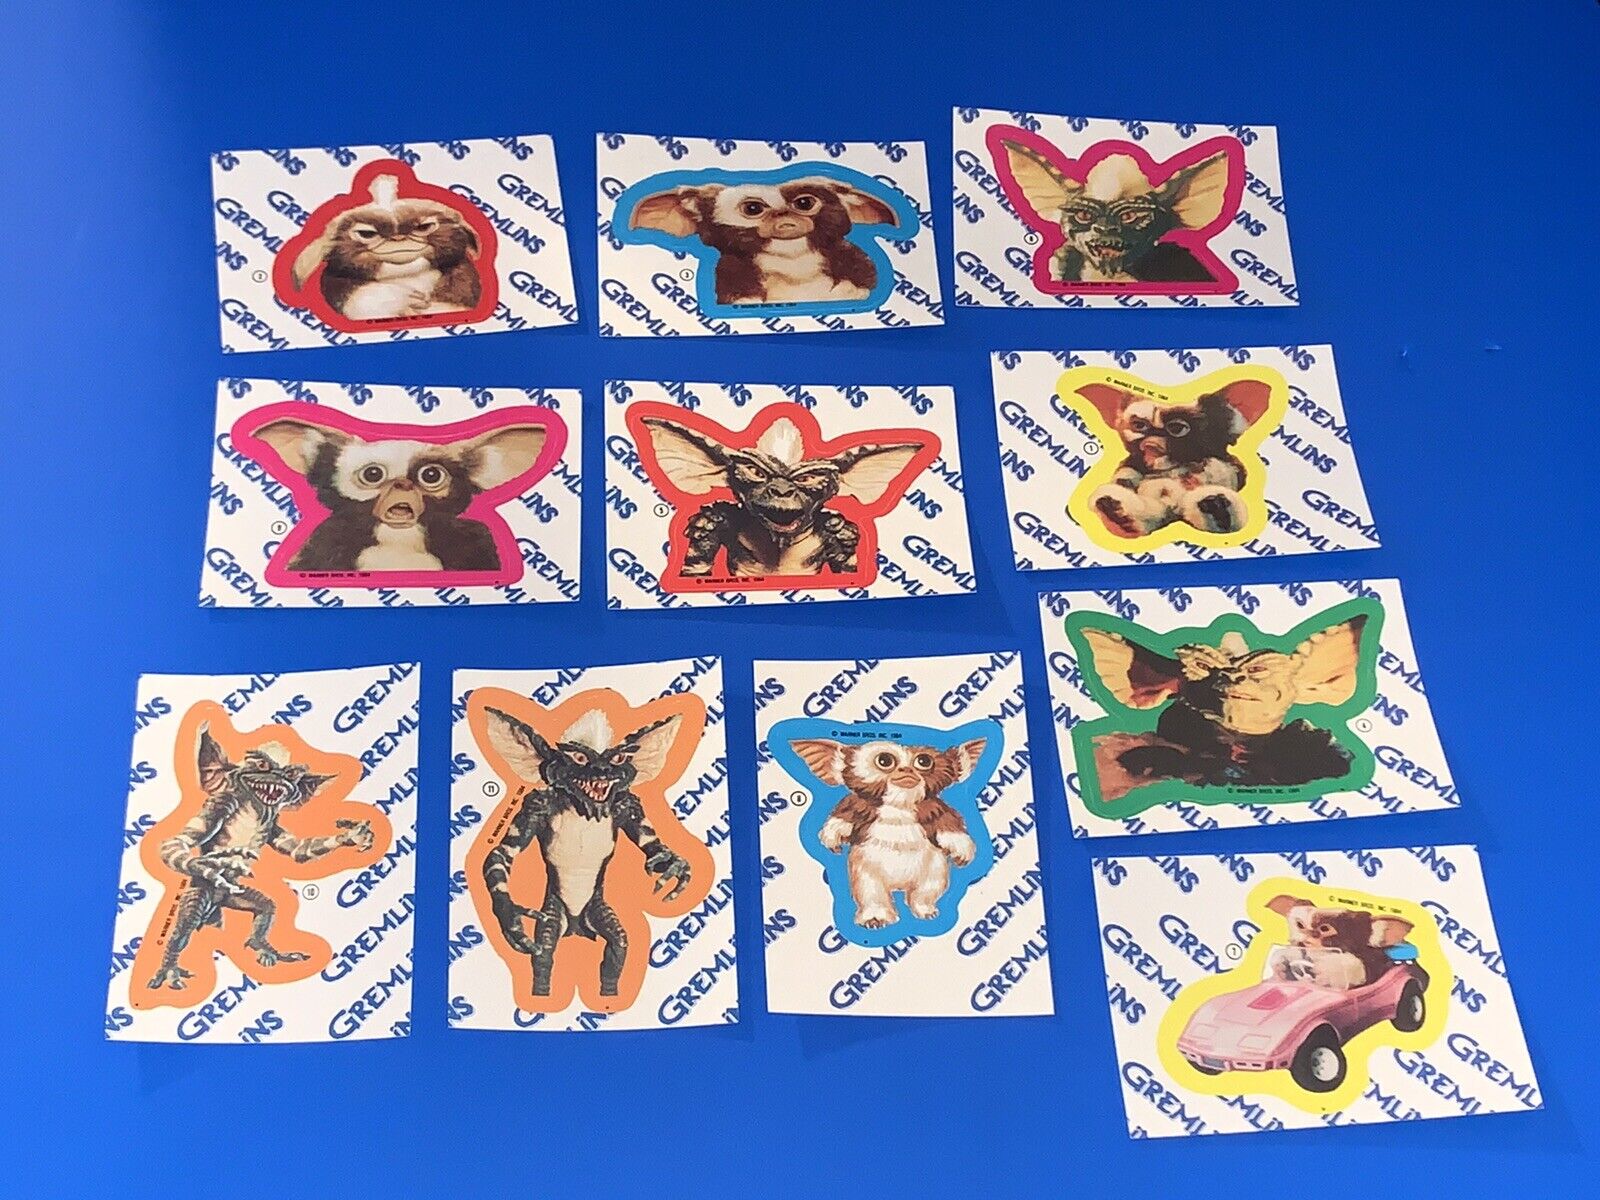 1984 Topps GREMLINS Complete Sticker Set Of 11 Stickers In MINT Condition